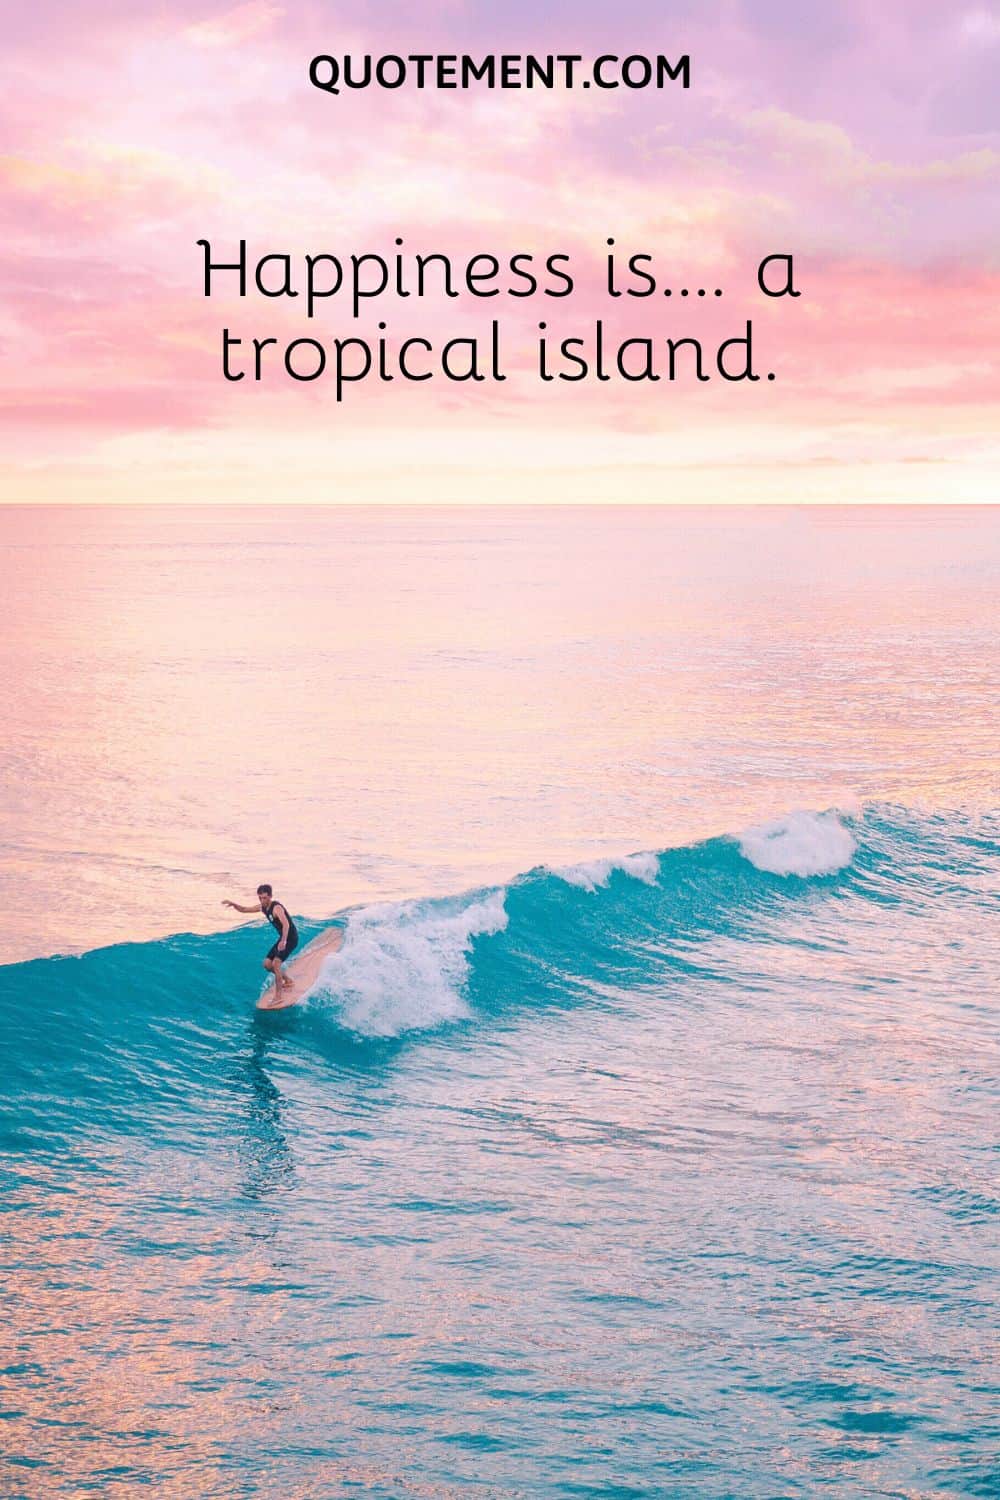 Happiness is…. a tropical island.